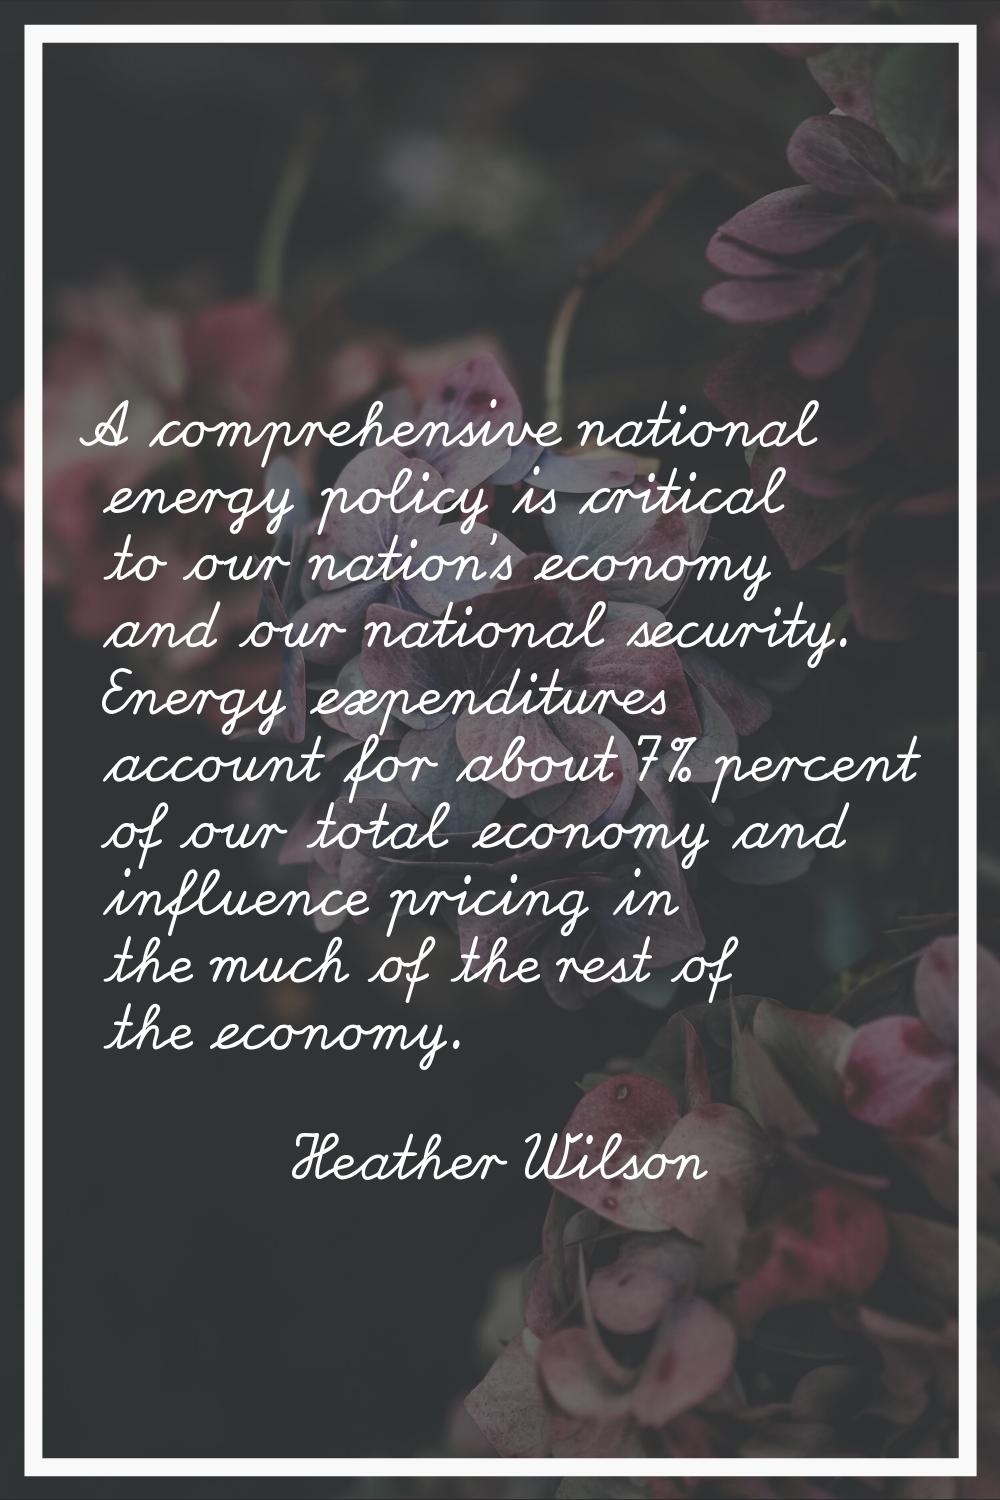 A comprehensive national energy policy is critical to our nation's economy and our national securit